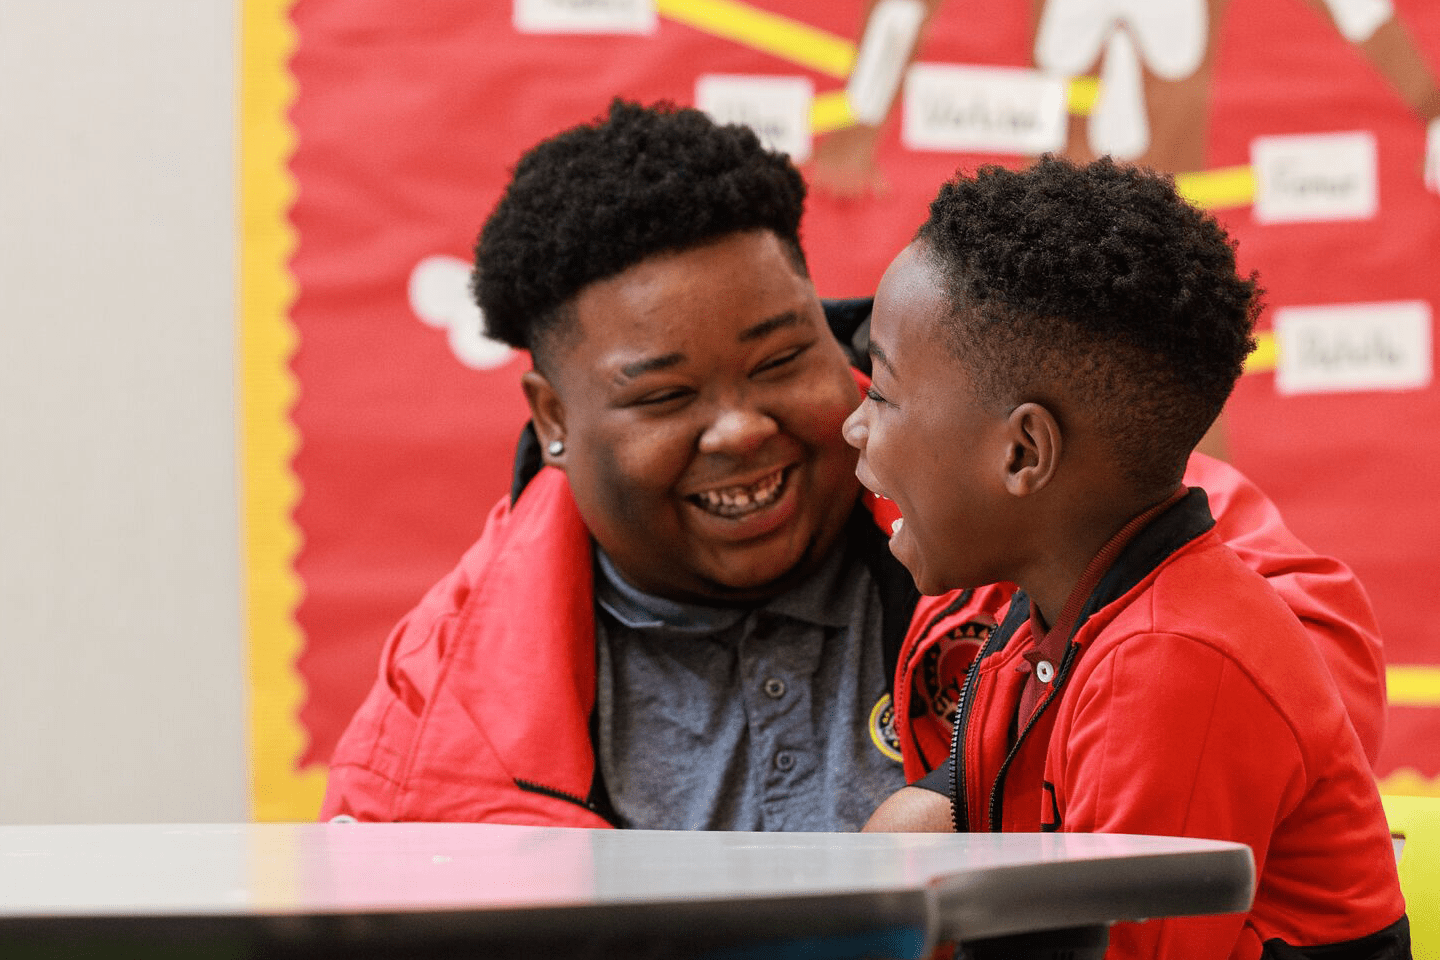 an elementary student and City Year AmeriCorps member laughing together